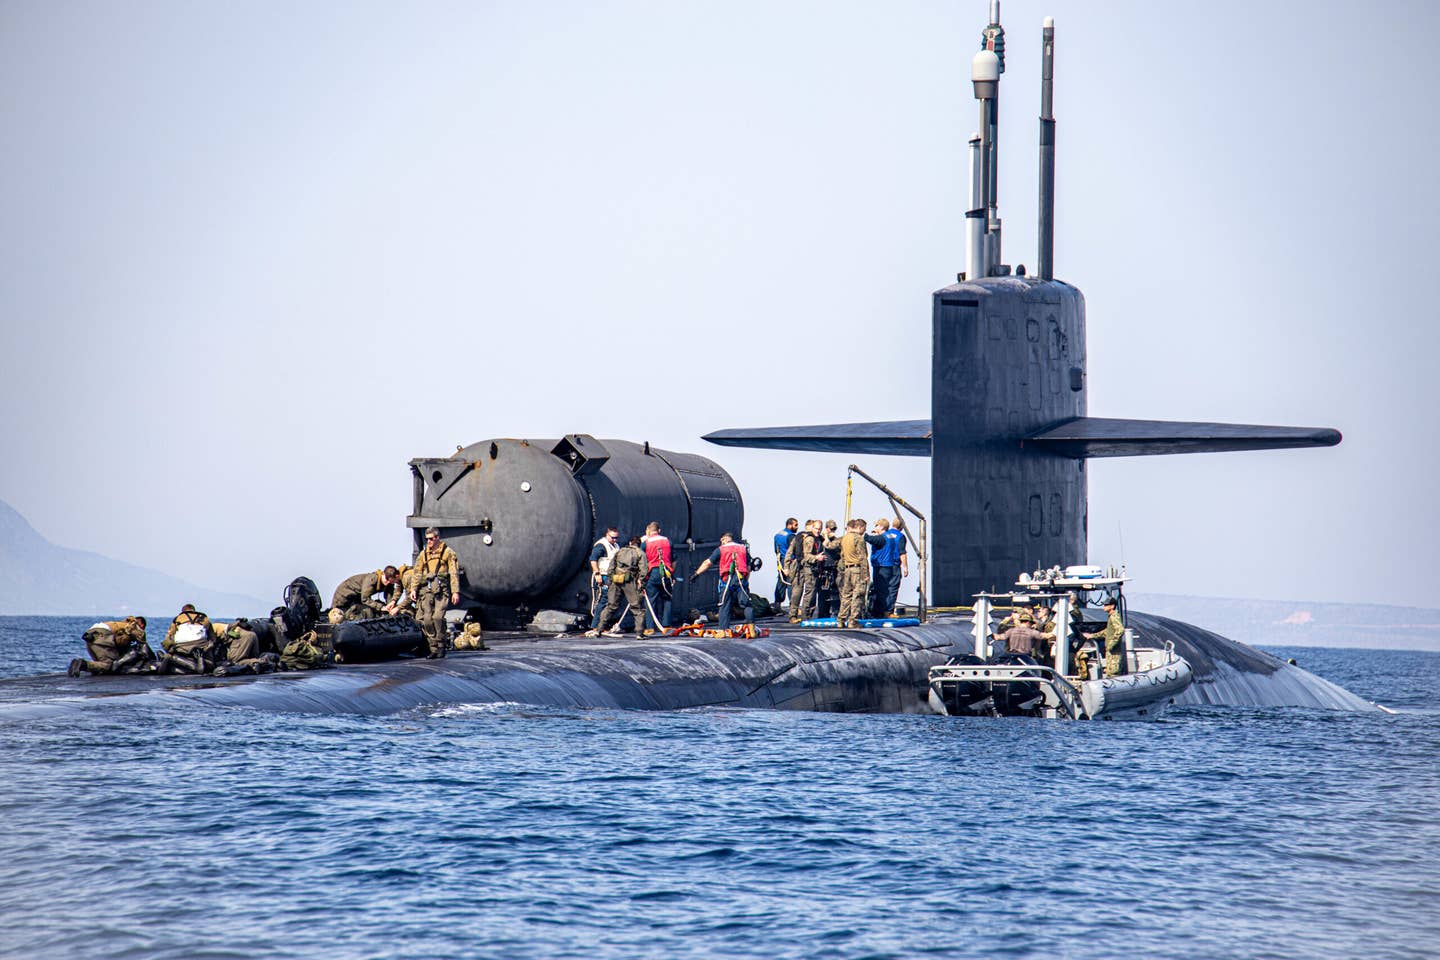 SOUDA BAY (March 27, 2022) – The <em>Ohio</em> class guided-missile submarine USS <em>Georgia</em> (SSGN 729) near Souda Bay, Greece, during training with U.S. Marines from Task Force 61/2 (TF-61/2), conducting launch and recovery training with their combat rubber raiding craft, March 27, 2022. (U.S. Marine Corps photo by Sgt Dylan Chagnon/Released)